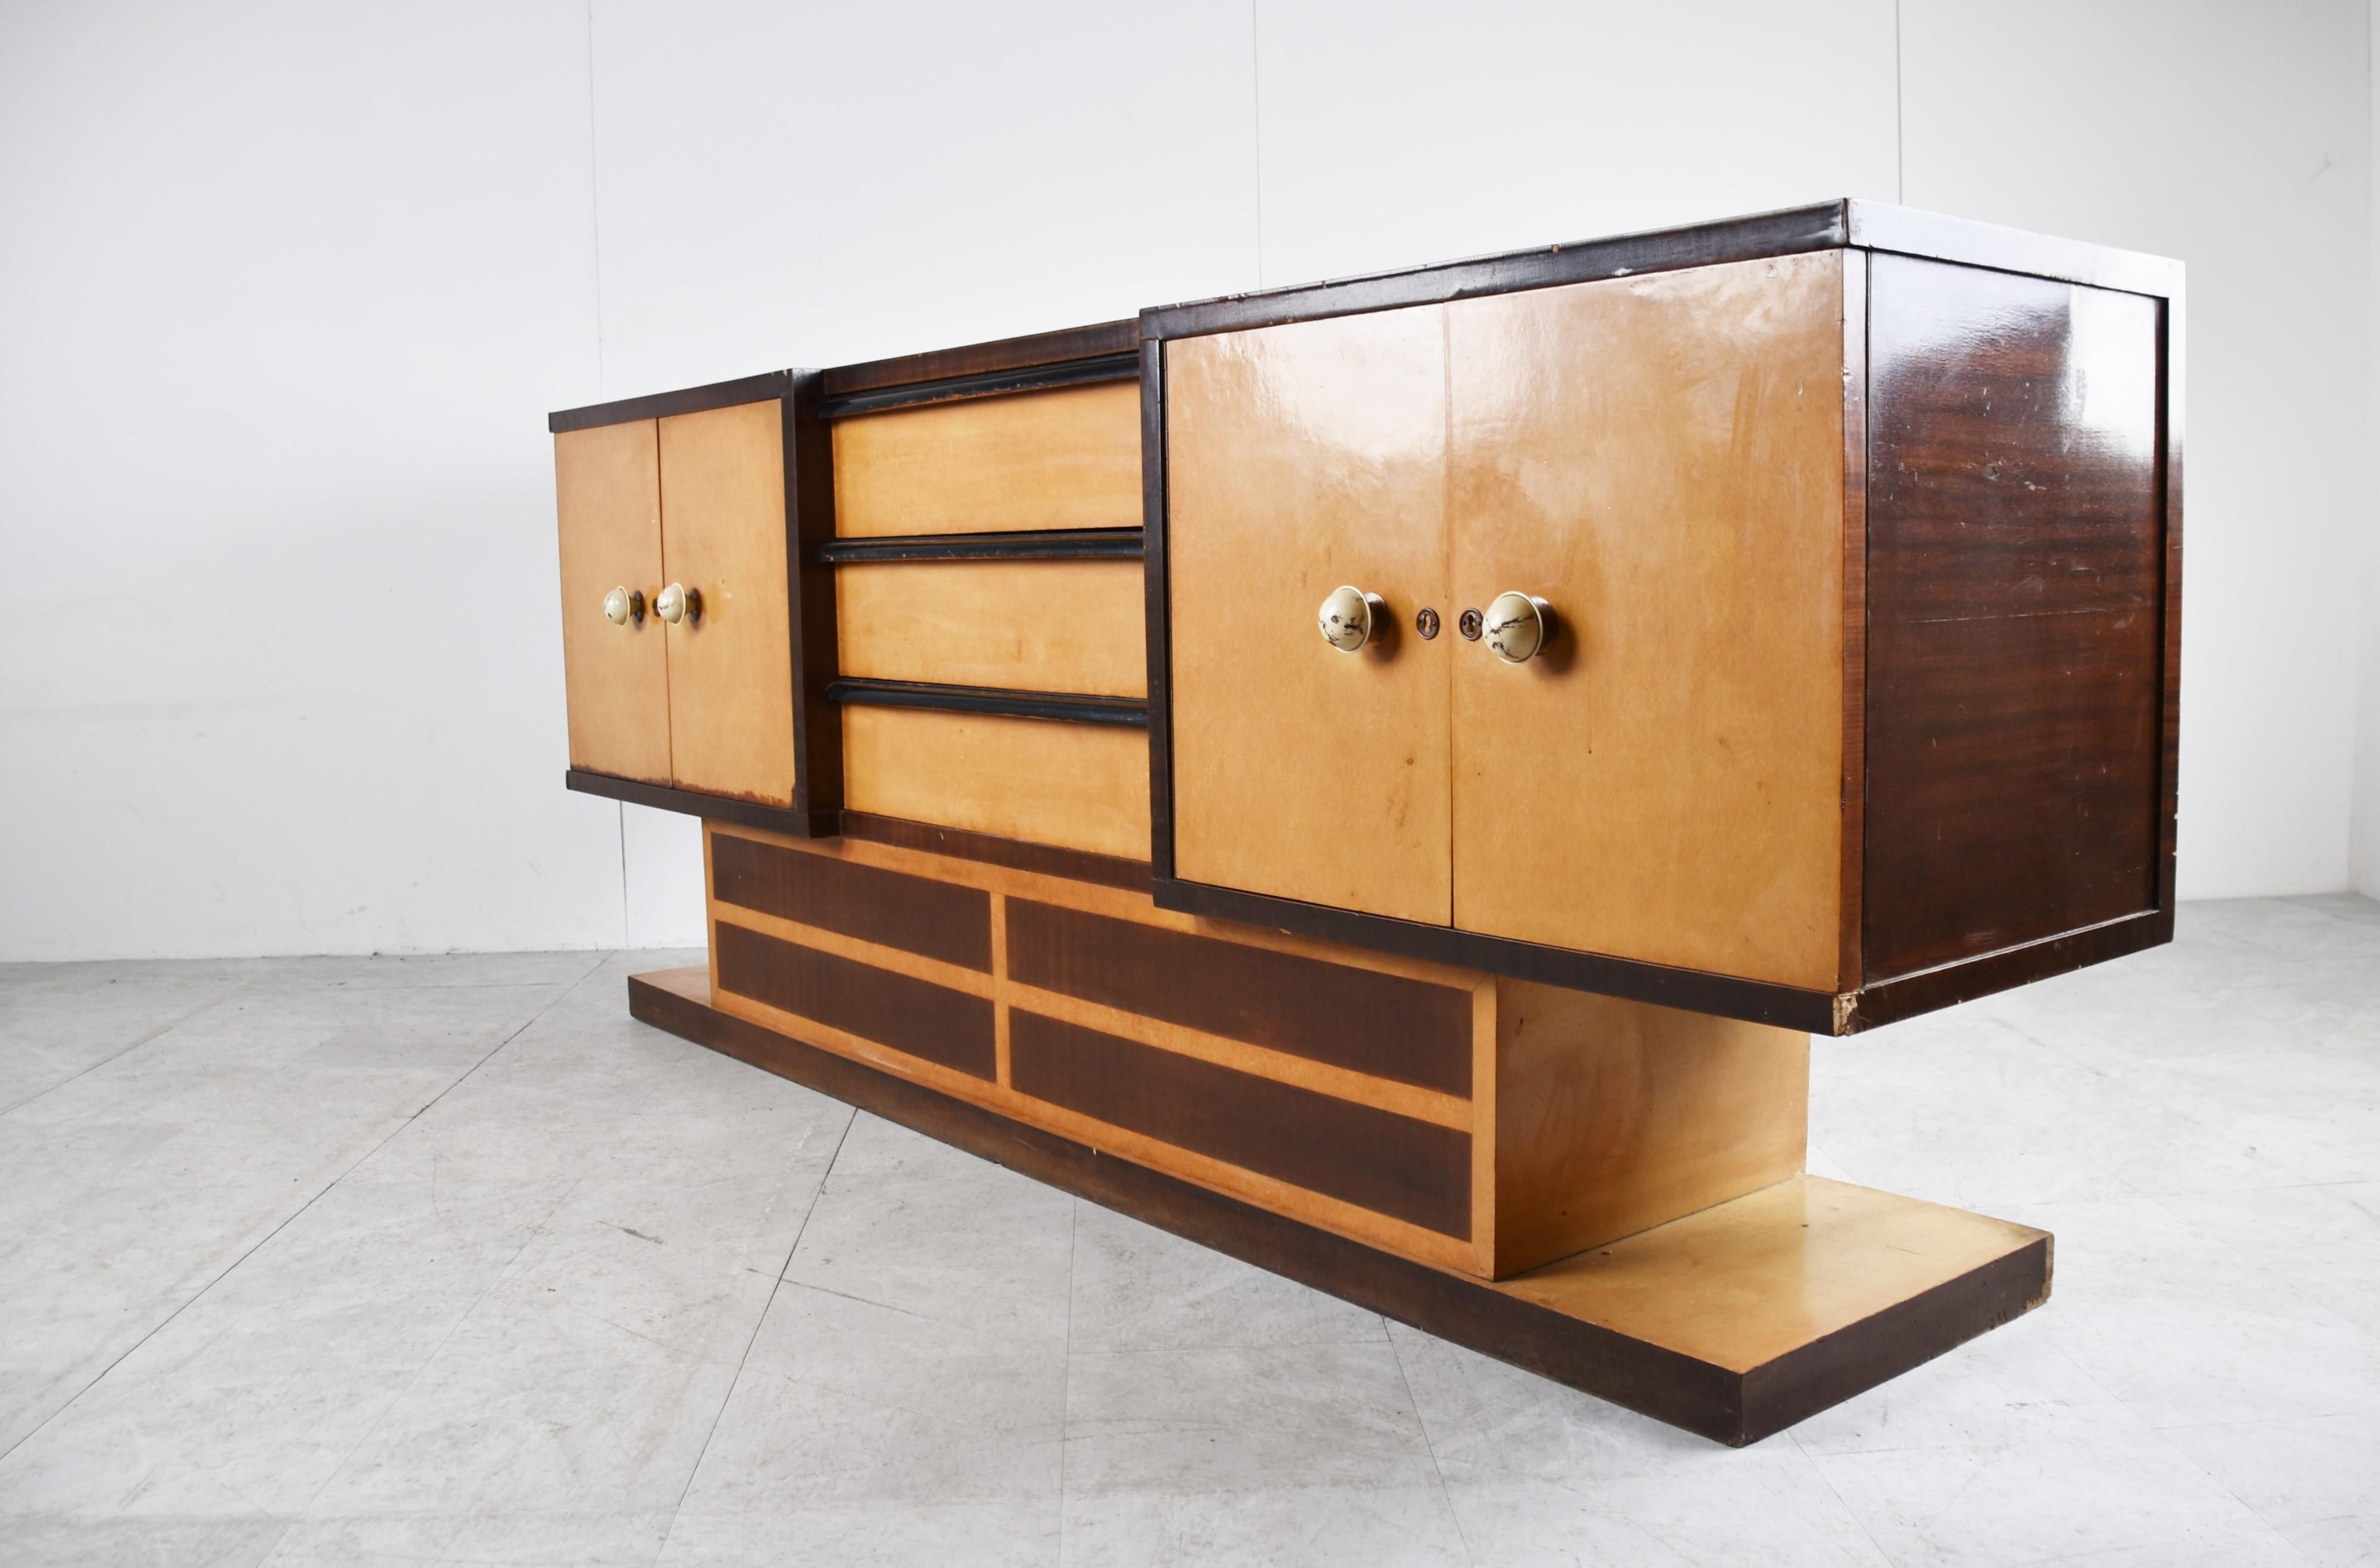 Striking two tone wood italian art deco sideboard.

The sideboard features 4 doors and three central drawers and white bakelite handles.

Beautiful art deco era design piece with beautiful colours.

Good overall condition with some age related